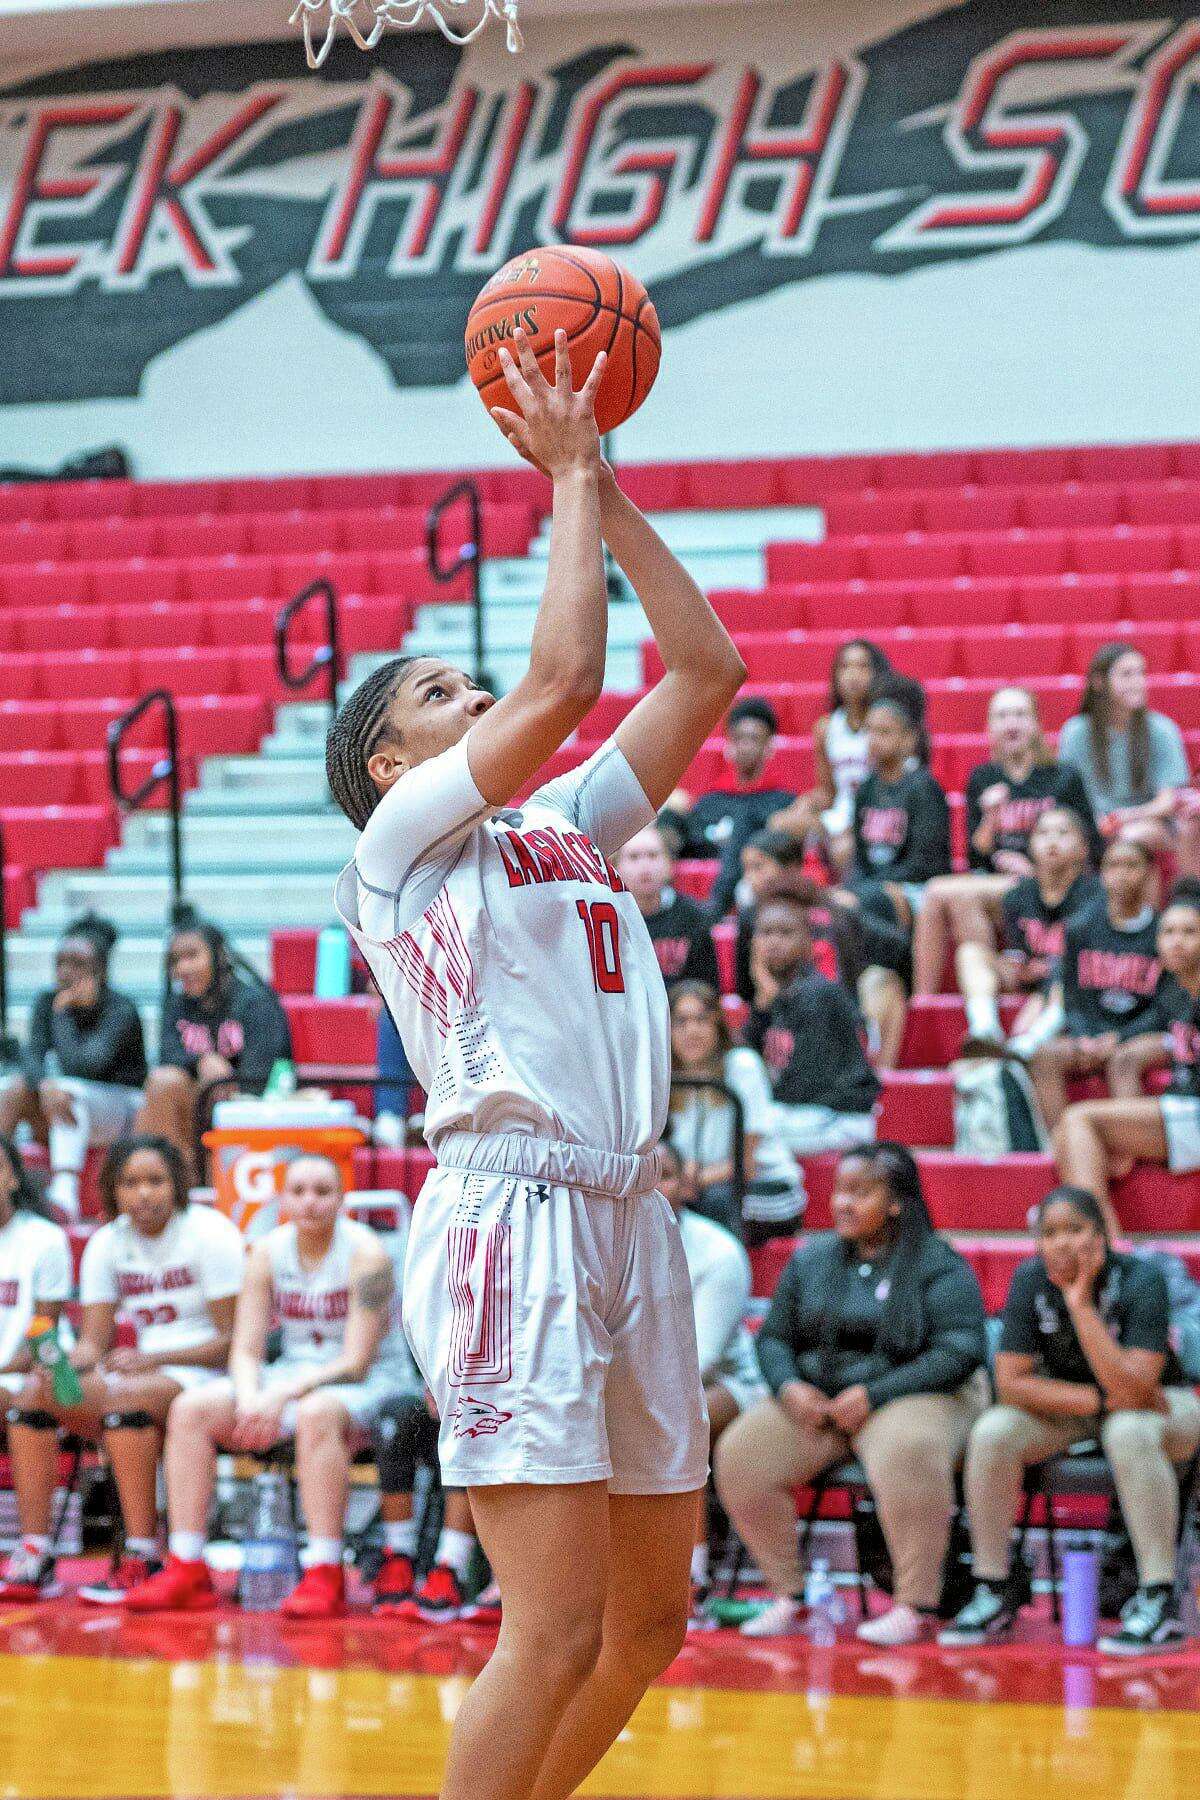 The Langham Creek girls basketball team is unbeaten in league play, as of Jan. 19, and in sole possession of first place heading in the second round of District 16-6A. The Lady Lobos are the No. 17 ranked team in the latest TABC rankings.